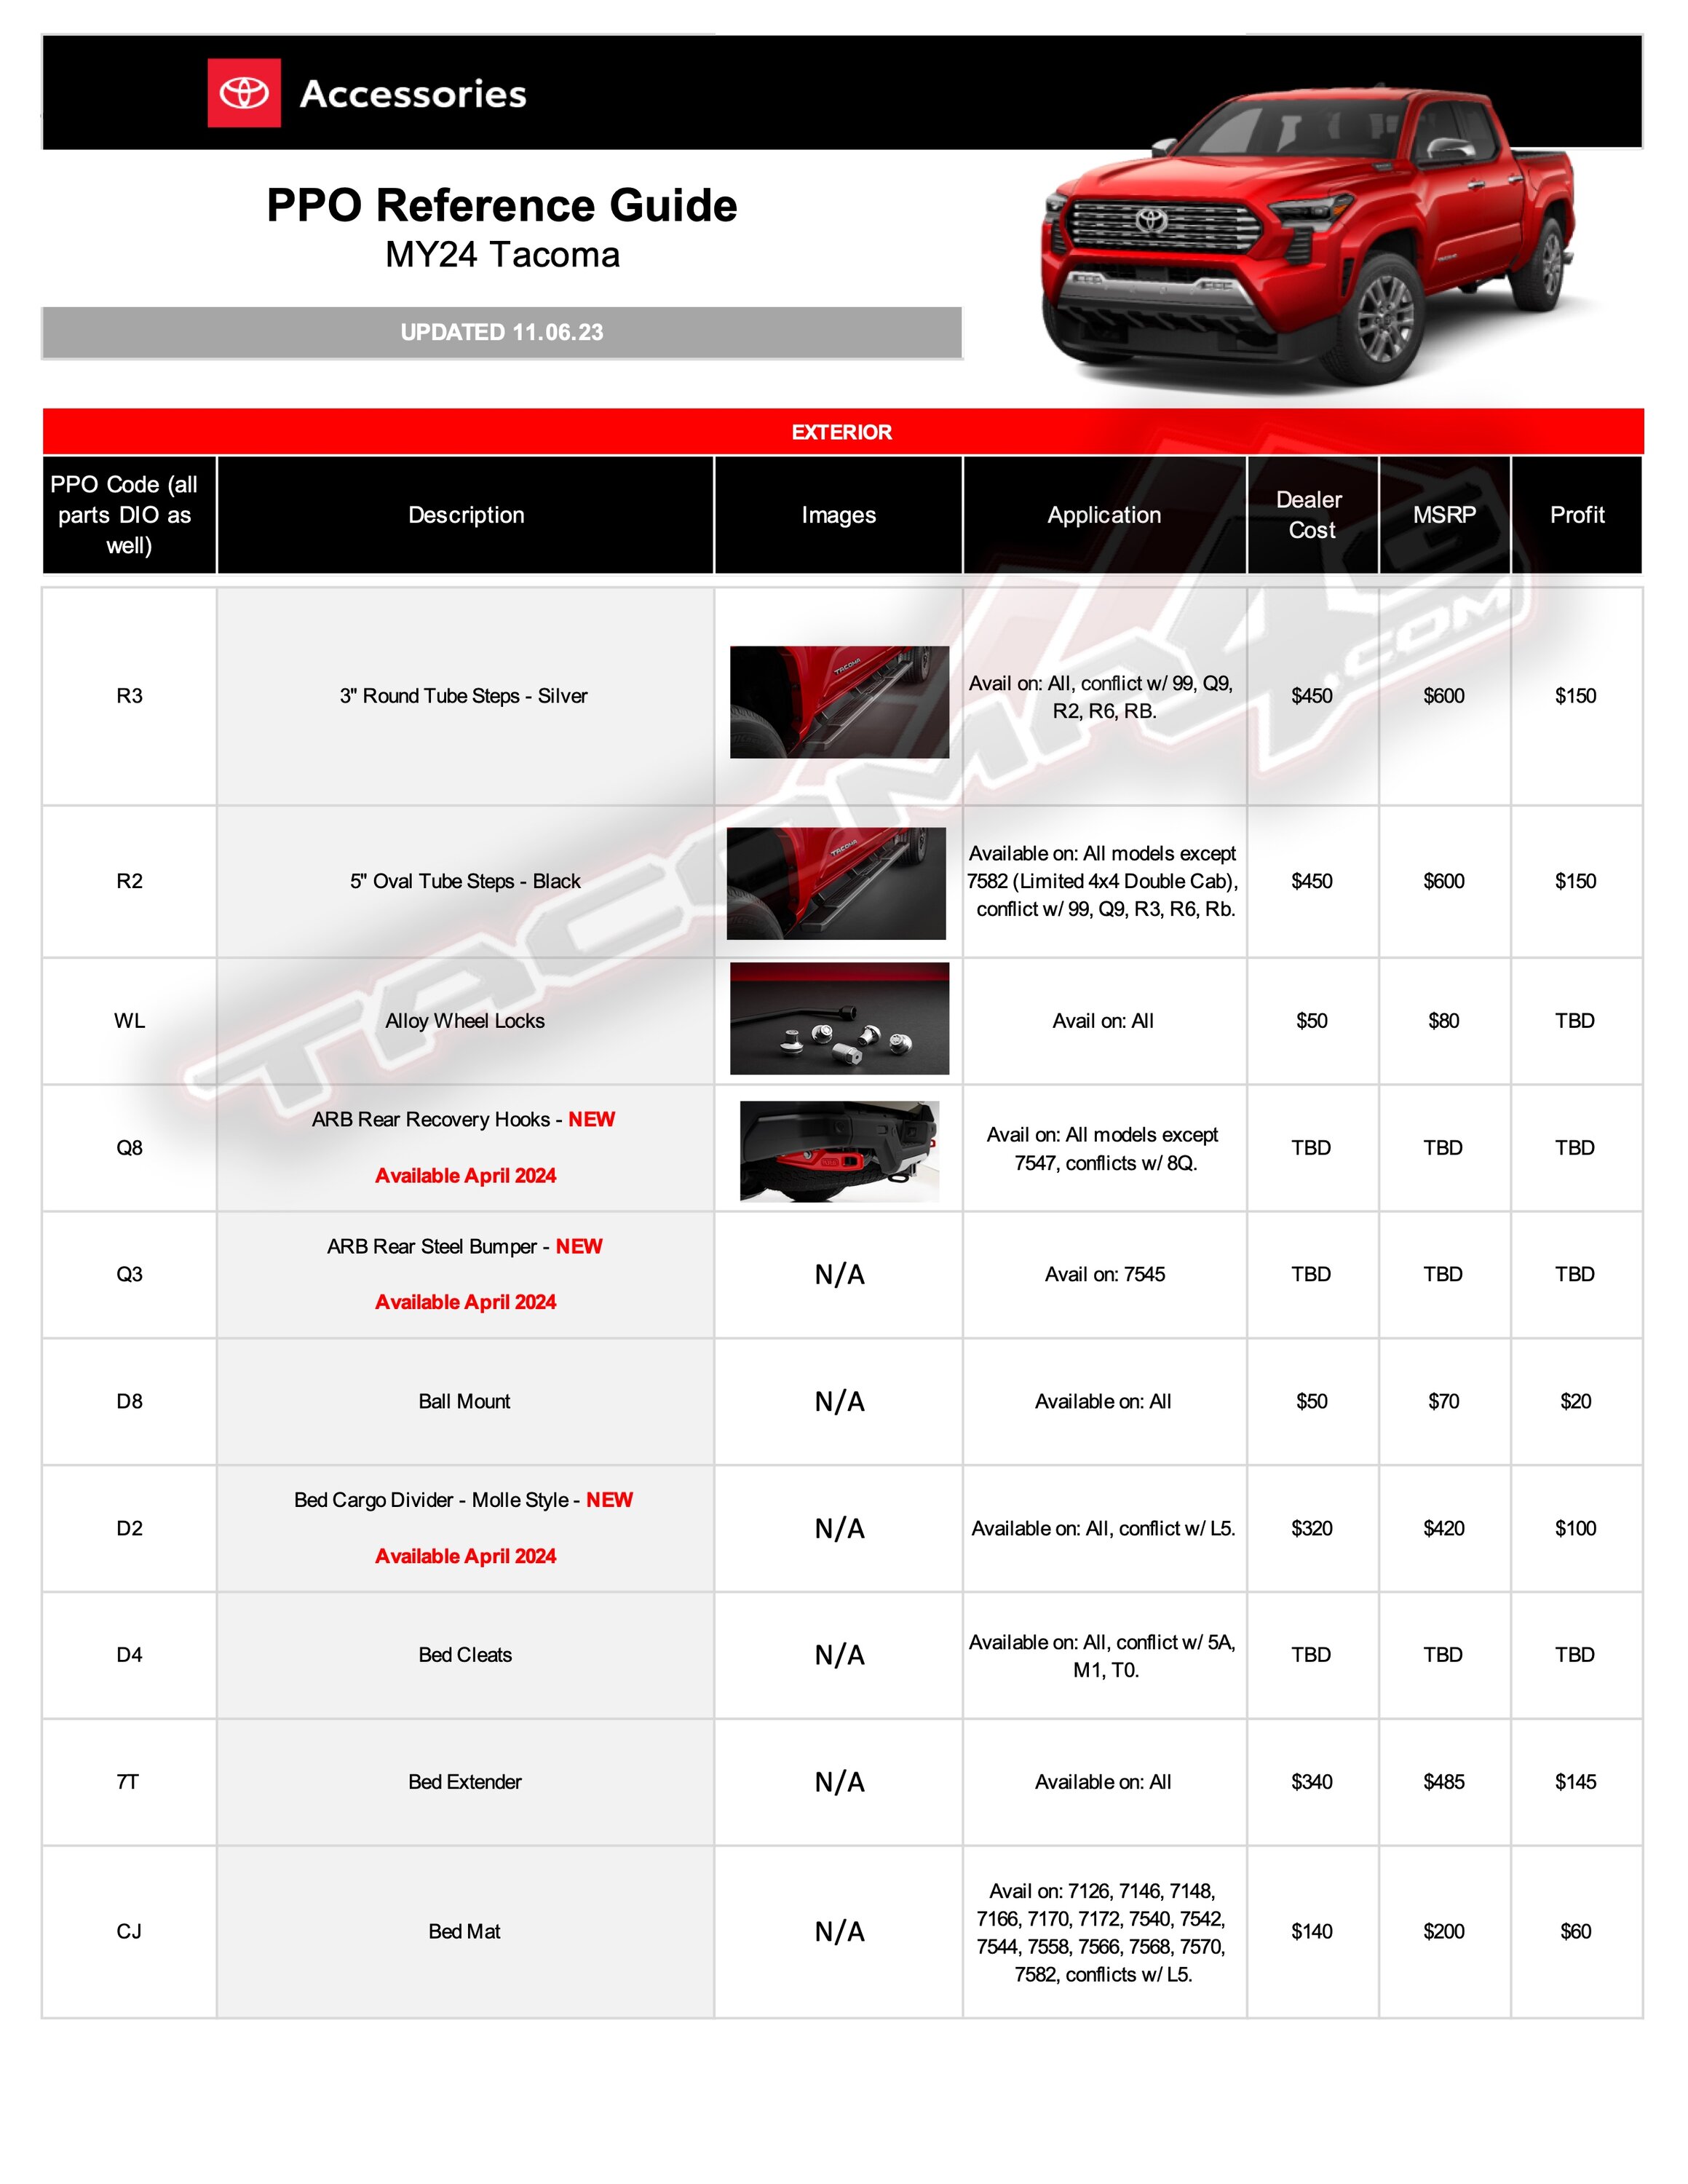 2024 Tacoma 2024 Tacoma Post-Production Options (PPO) Guide - OEM / TRD Accessories Parts + Pricing!  [UPDATED 5-7-24] 2024-tacoma-accessory-guide-1